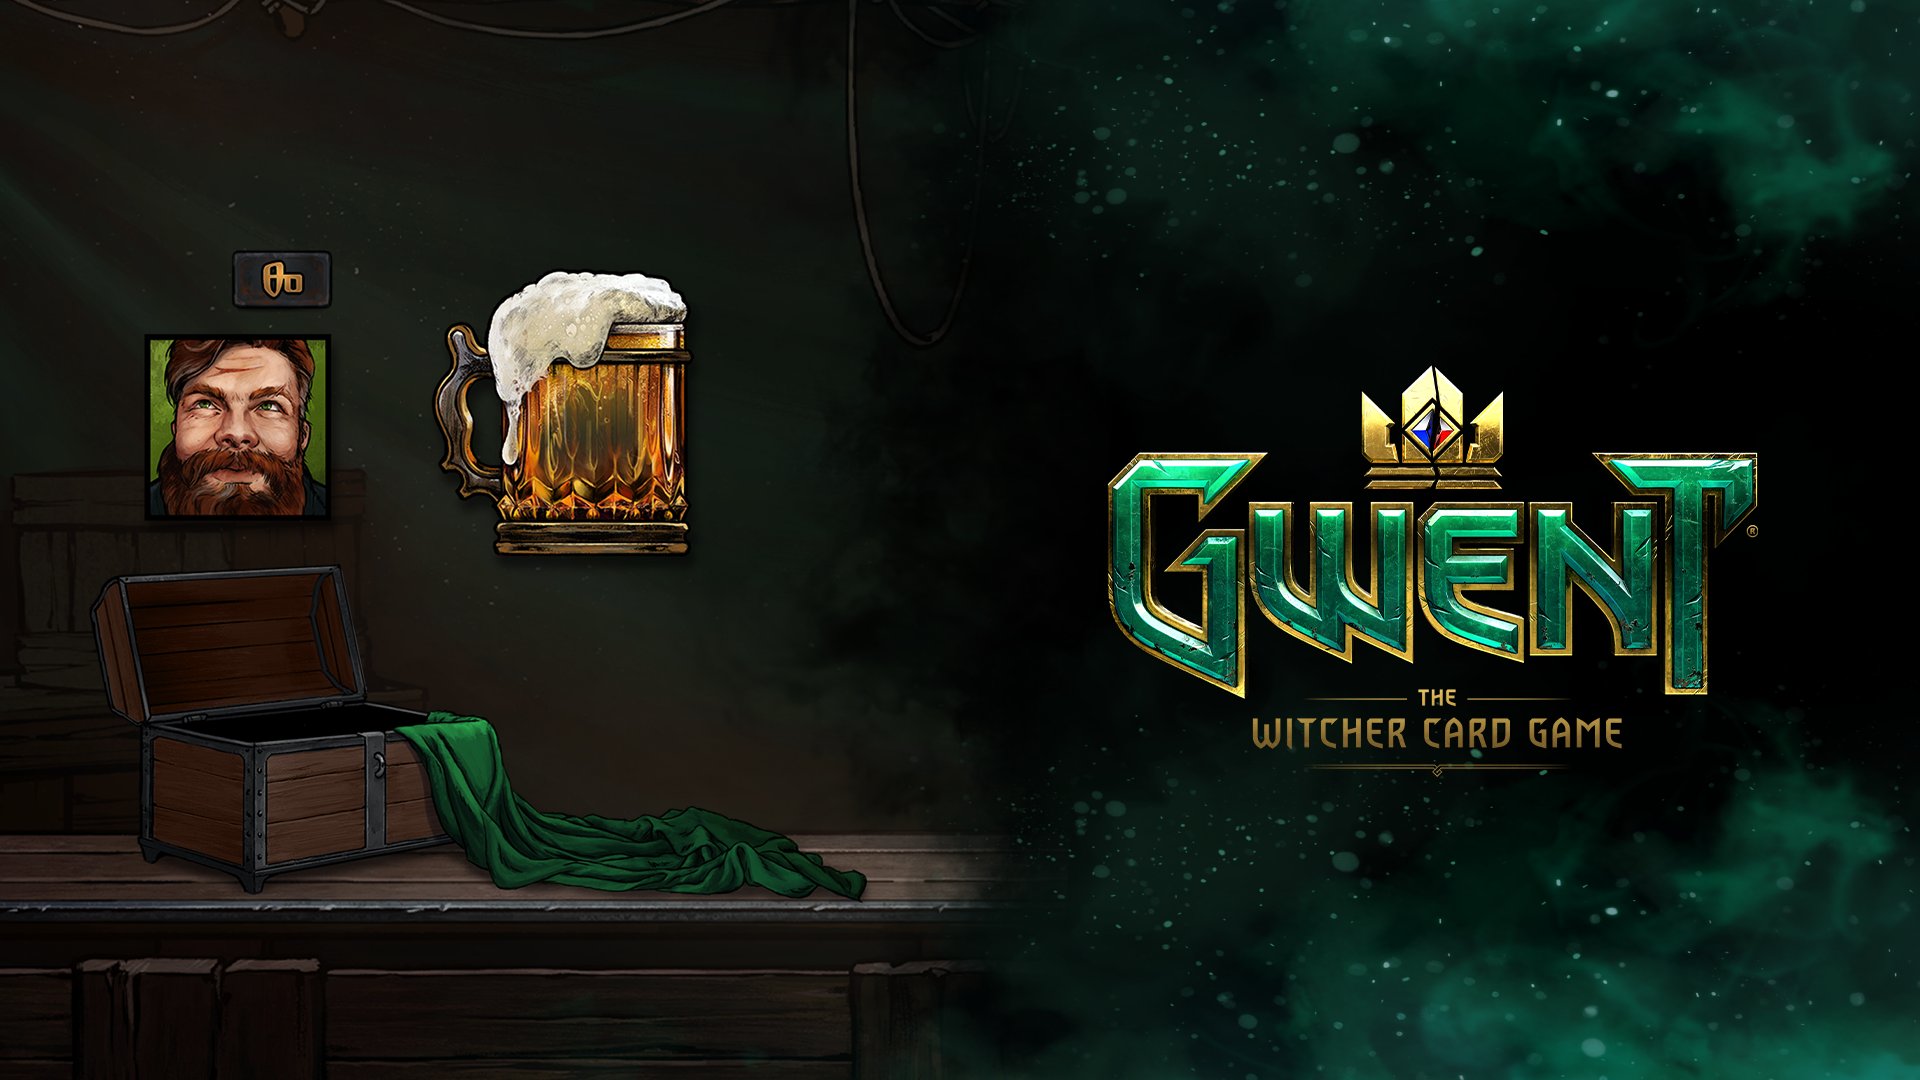 GWENT on Twitter: "Celebrate Patrick's Day with the Viziman Champion Bundle! Available only until March 24th! ☘️ Bundle contains: - Reveler avatar - Ale border - "Viziman Champion" title https://t.co/FCGffZyNWE" / Twitter